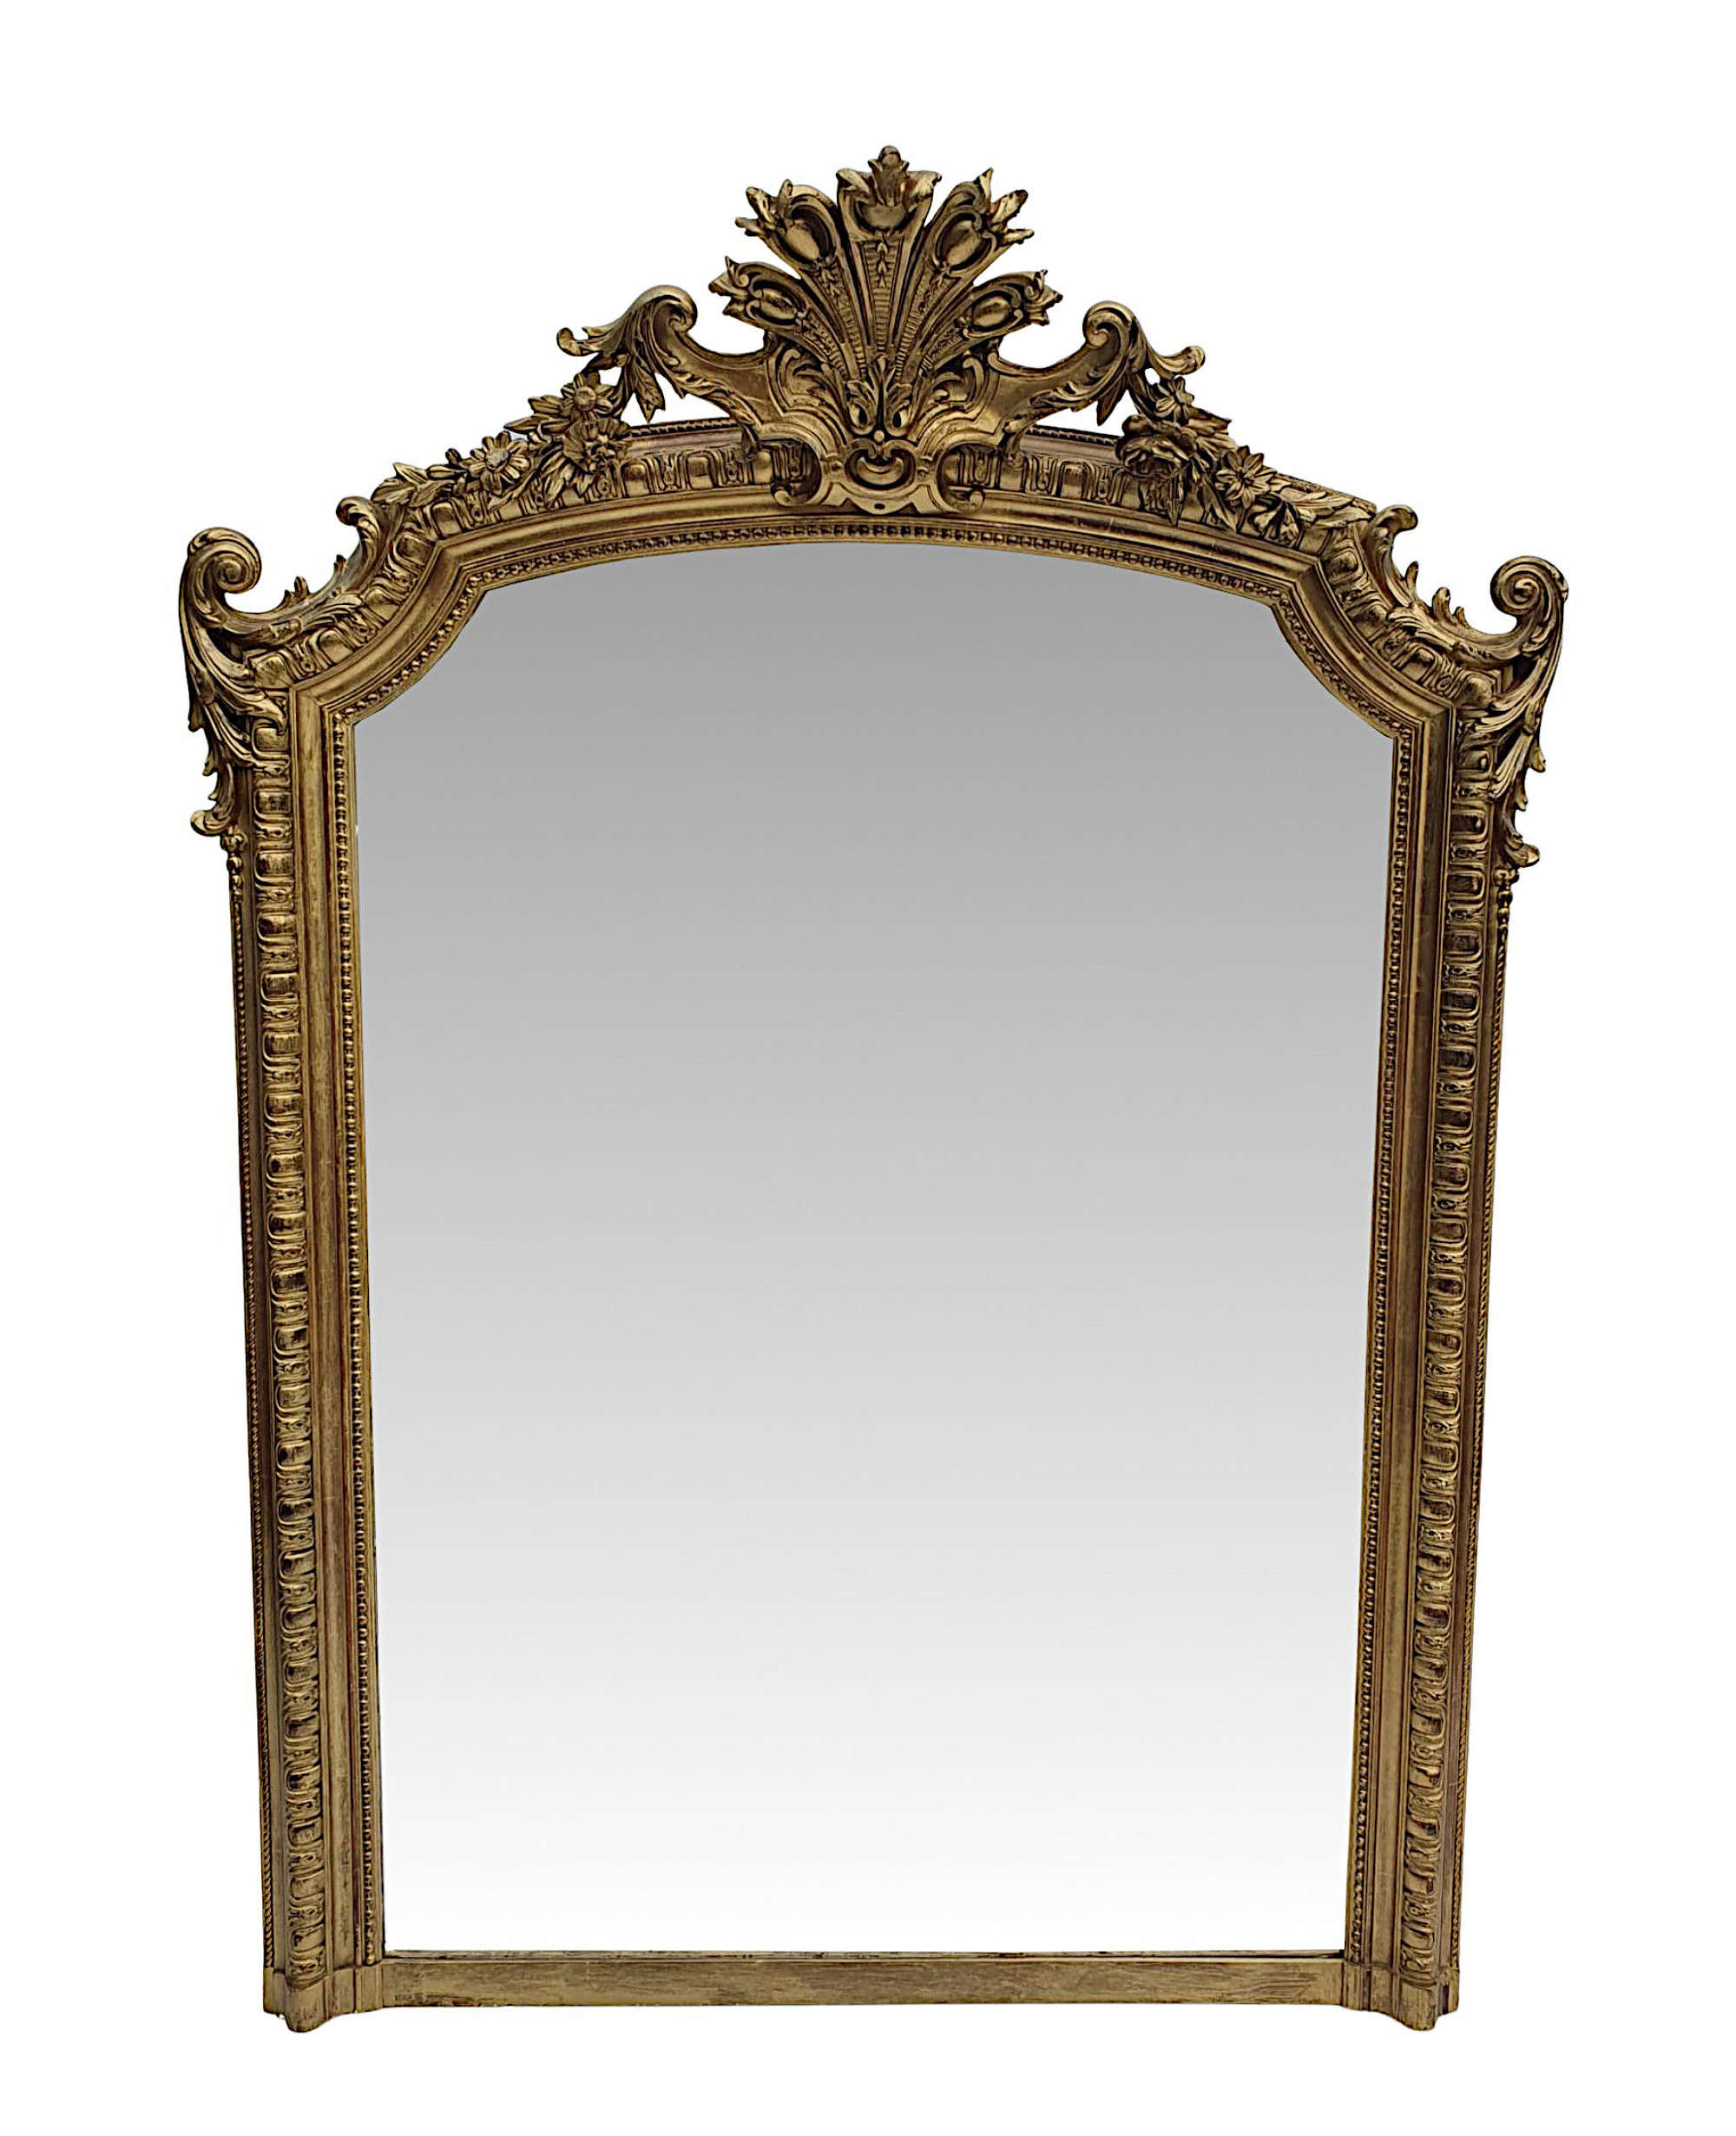 A Superb 19th Century Giltwood Overmantle Or Hall Antique Mirror